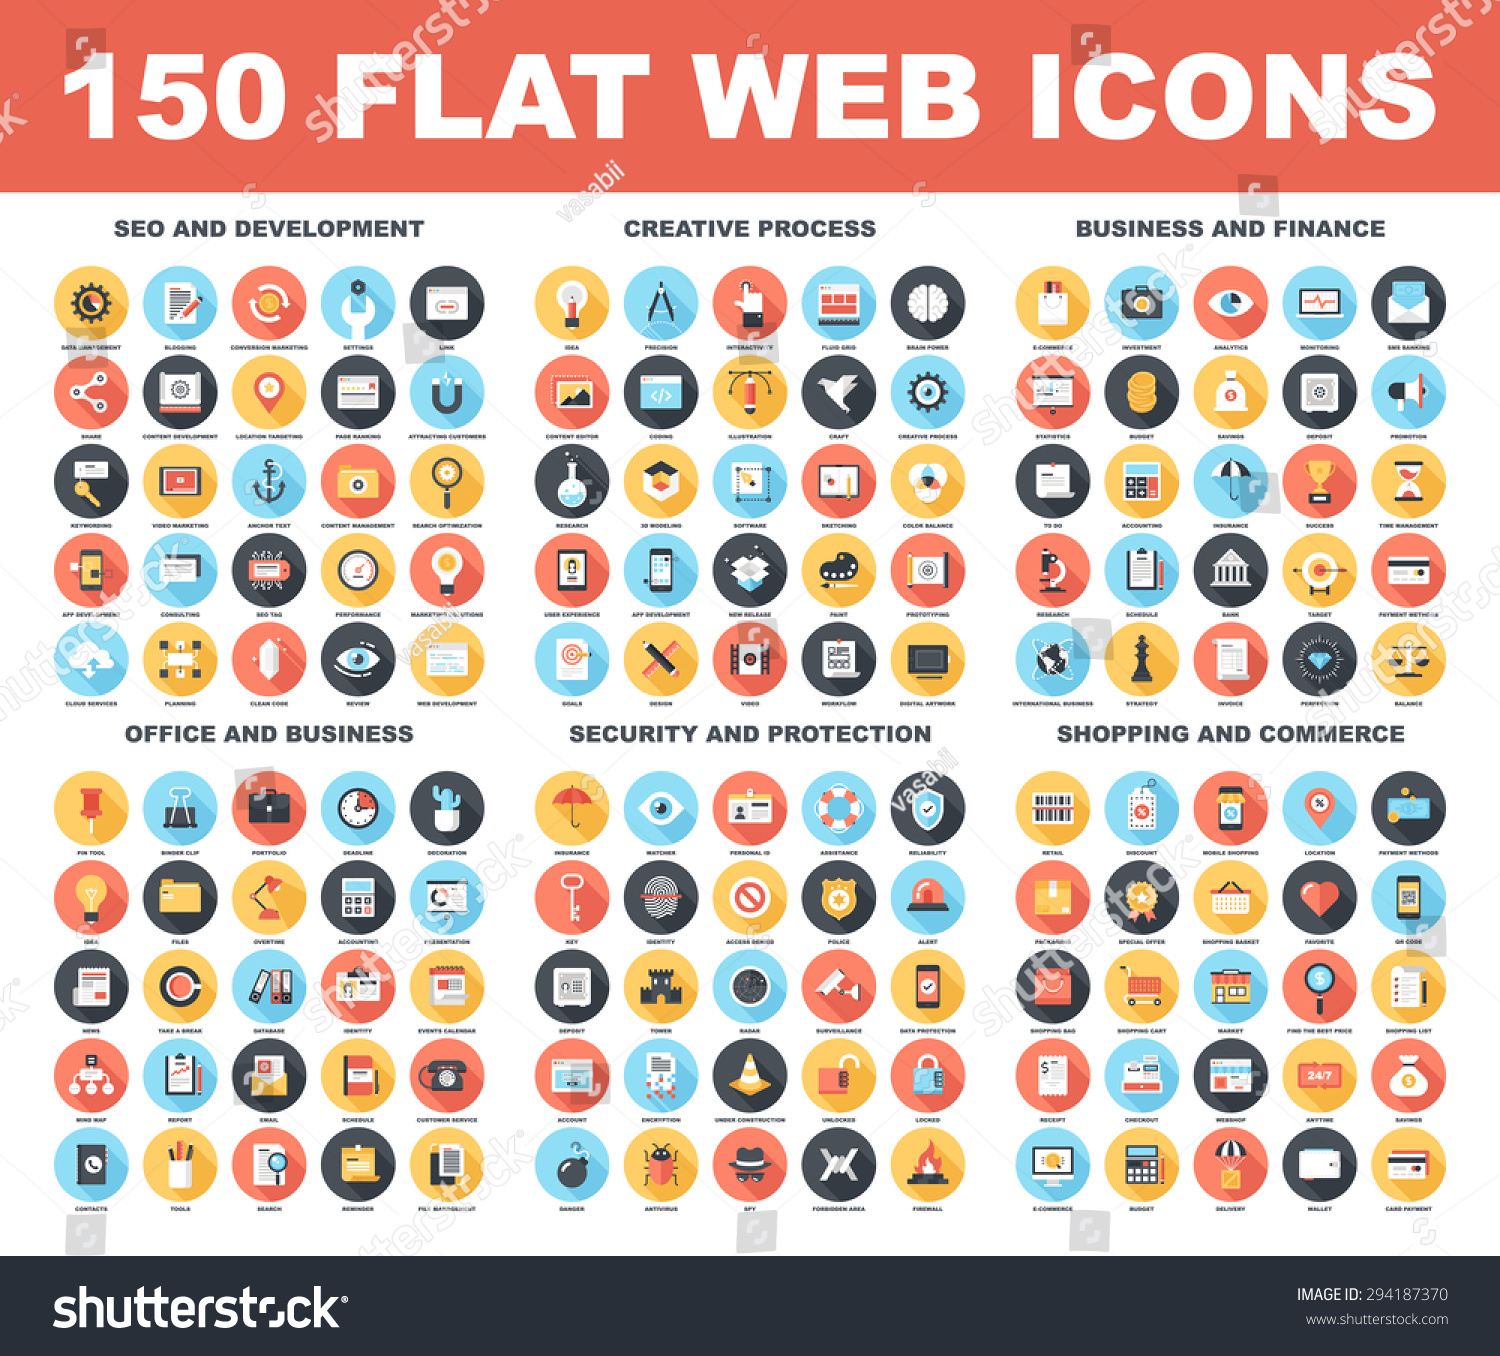 Vector set of 150 flat web icons with long shadow on following themes - SEO and development, creative process, business and finance, office and business, security and protection, shopping and commerce #294187370